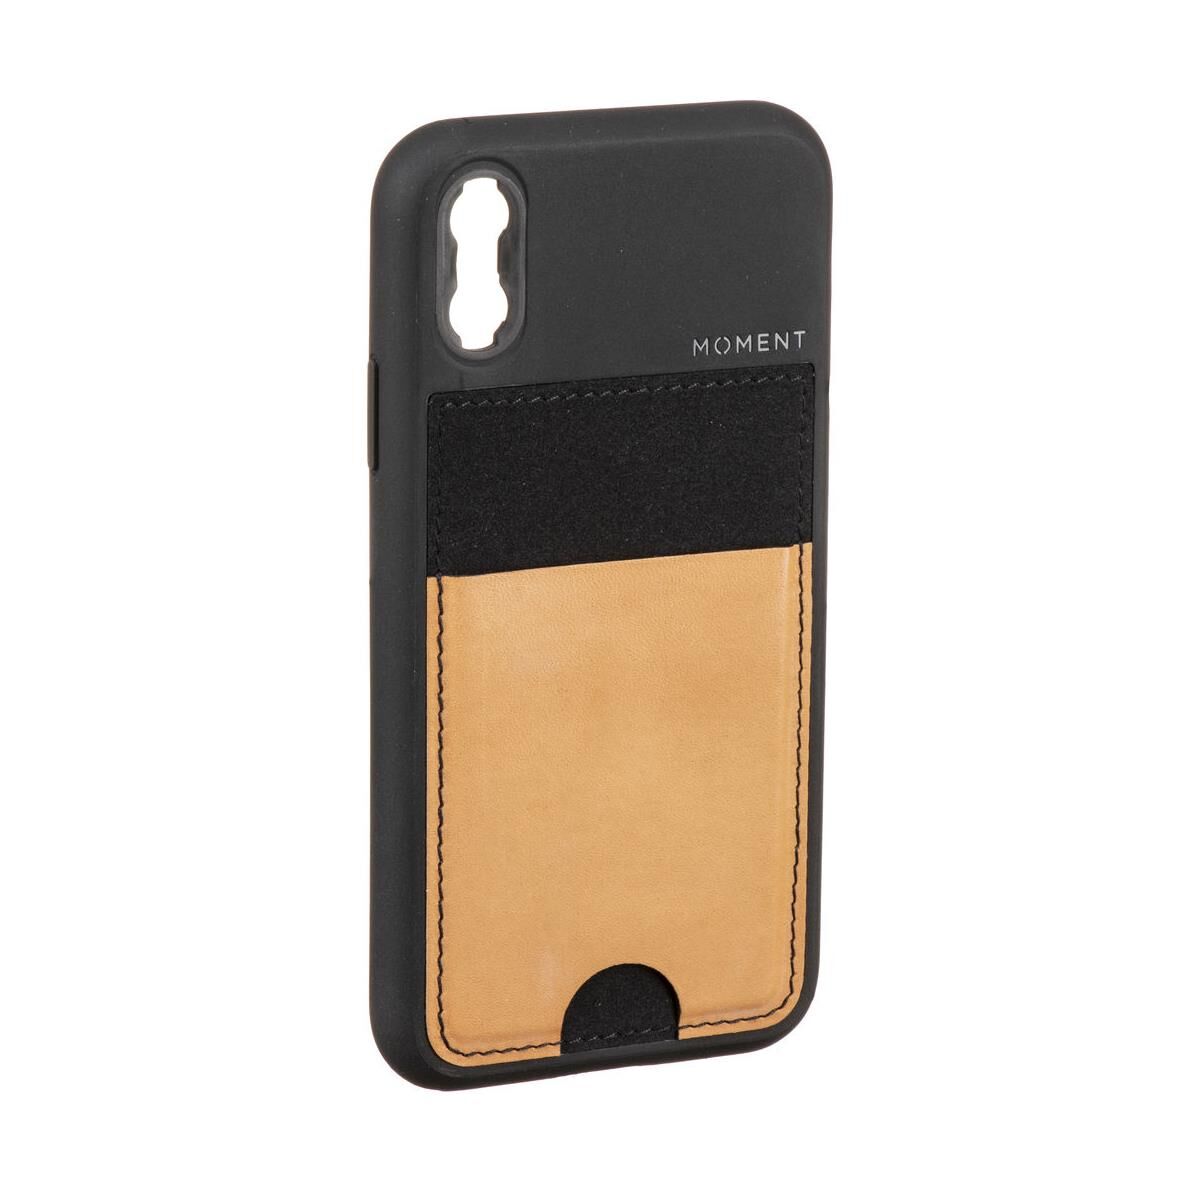 Moment iPhone XR Wallet Photo Case, Natural Leather